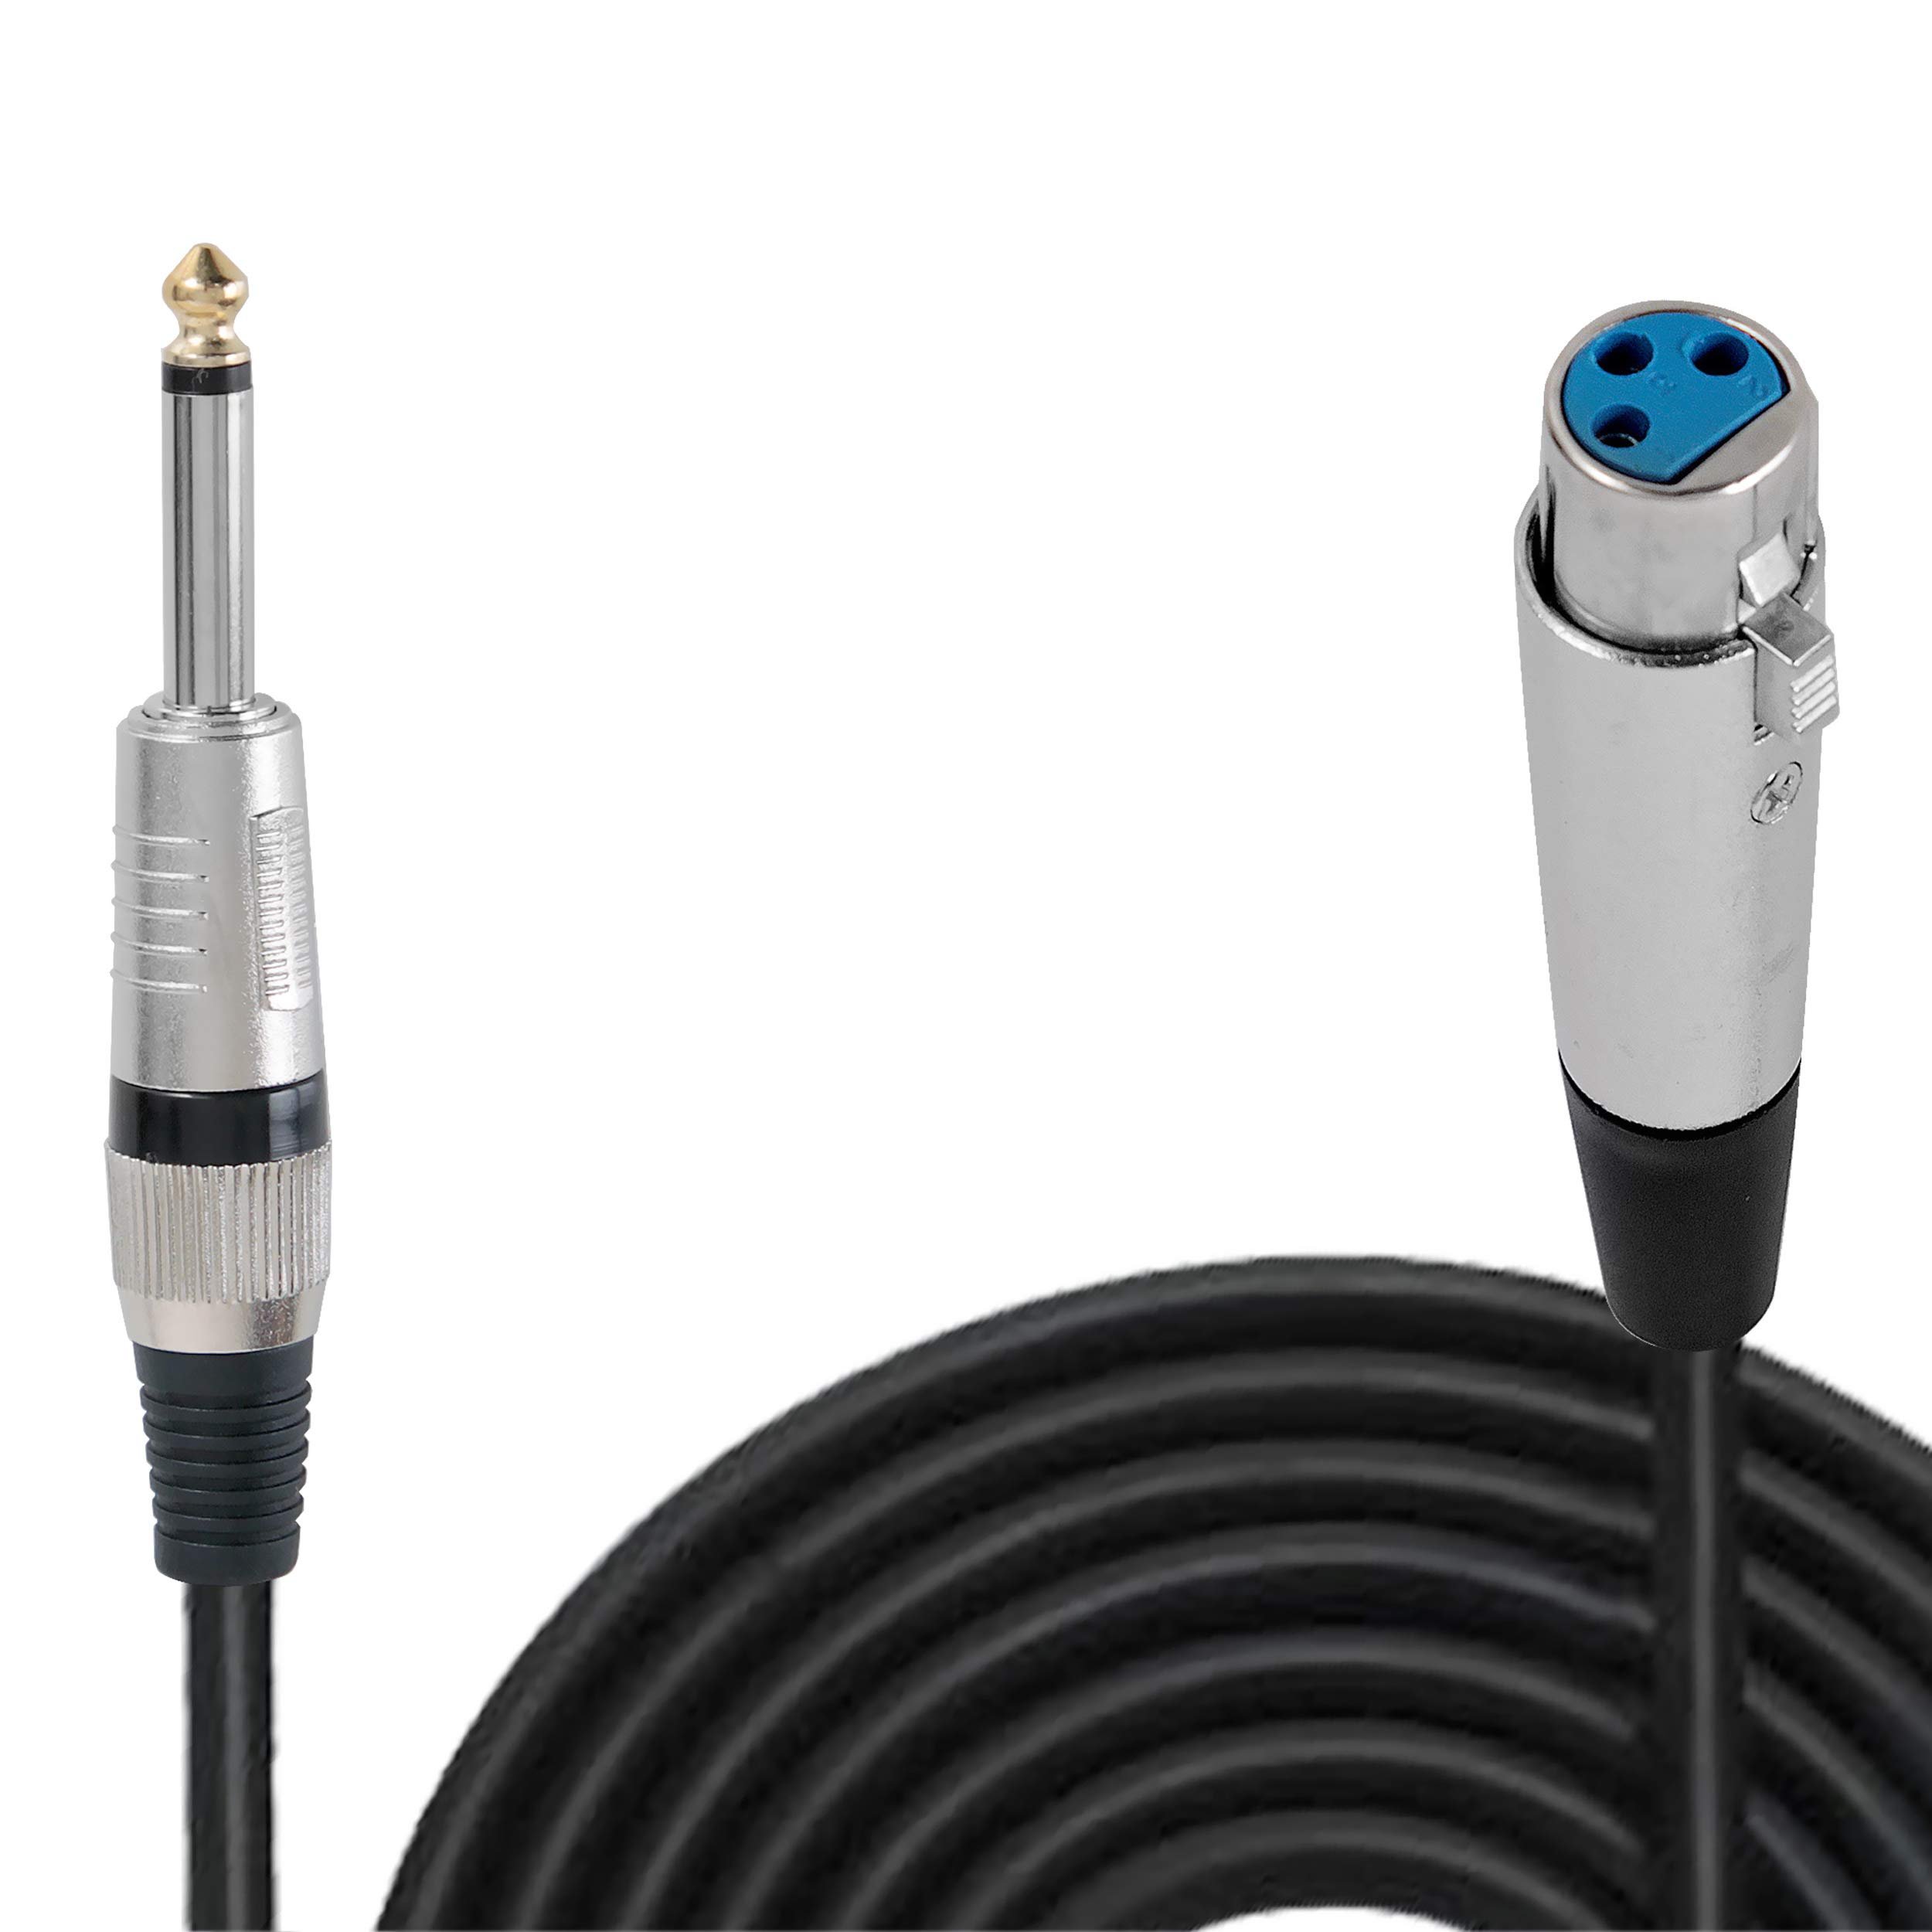 Pyle 30ft. Professional Microphone Cable 1/4 Inch Male To XLR Female Audio Cord Connector 30